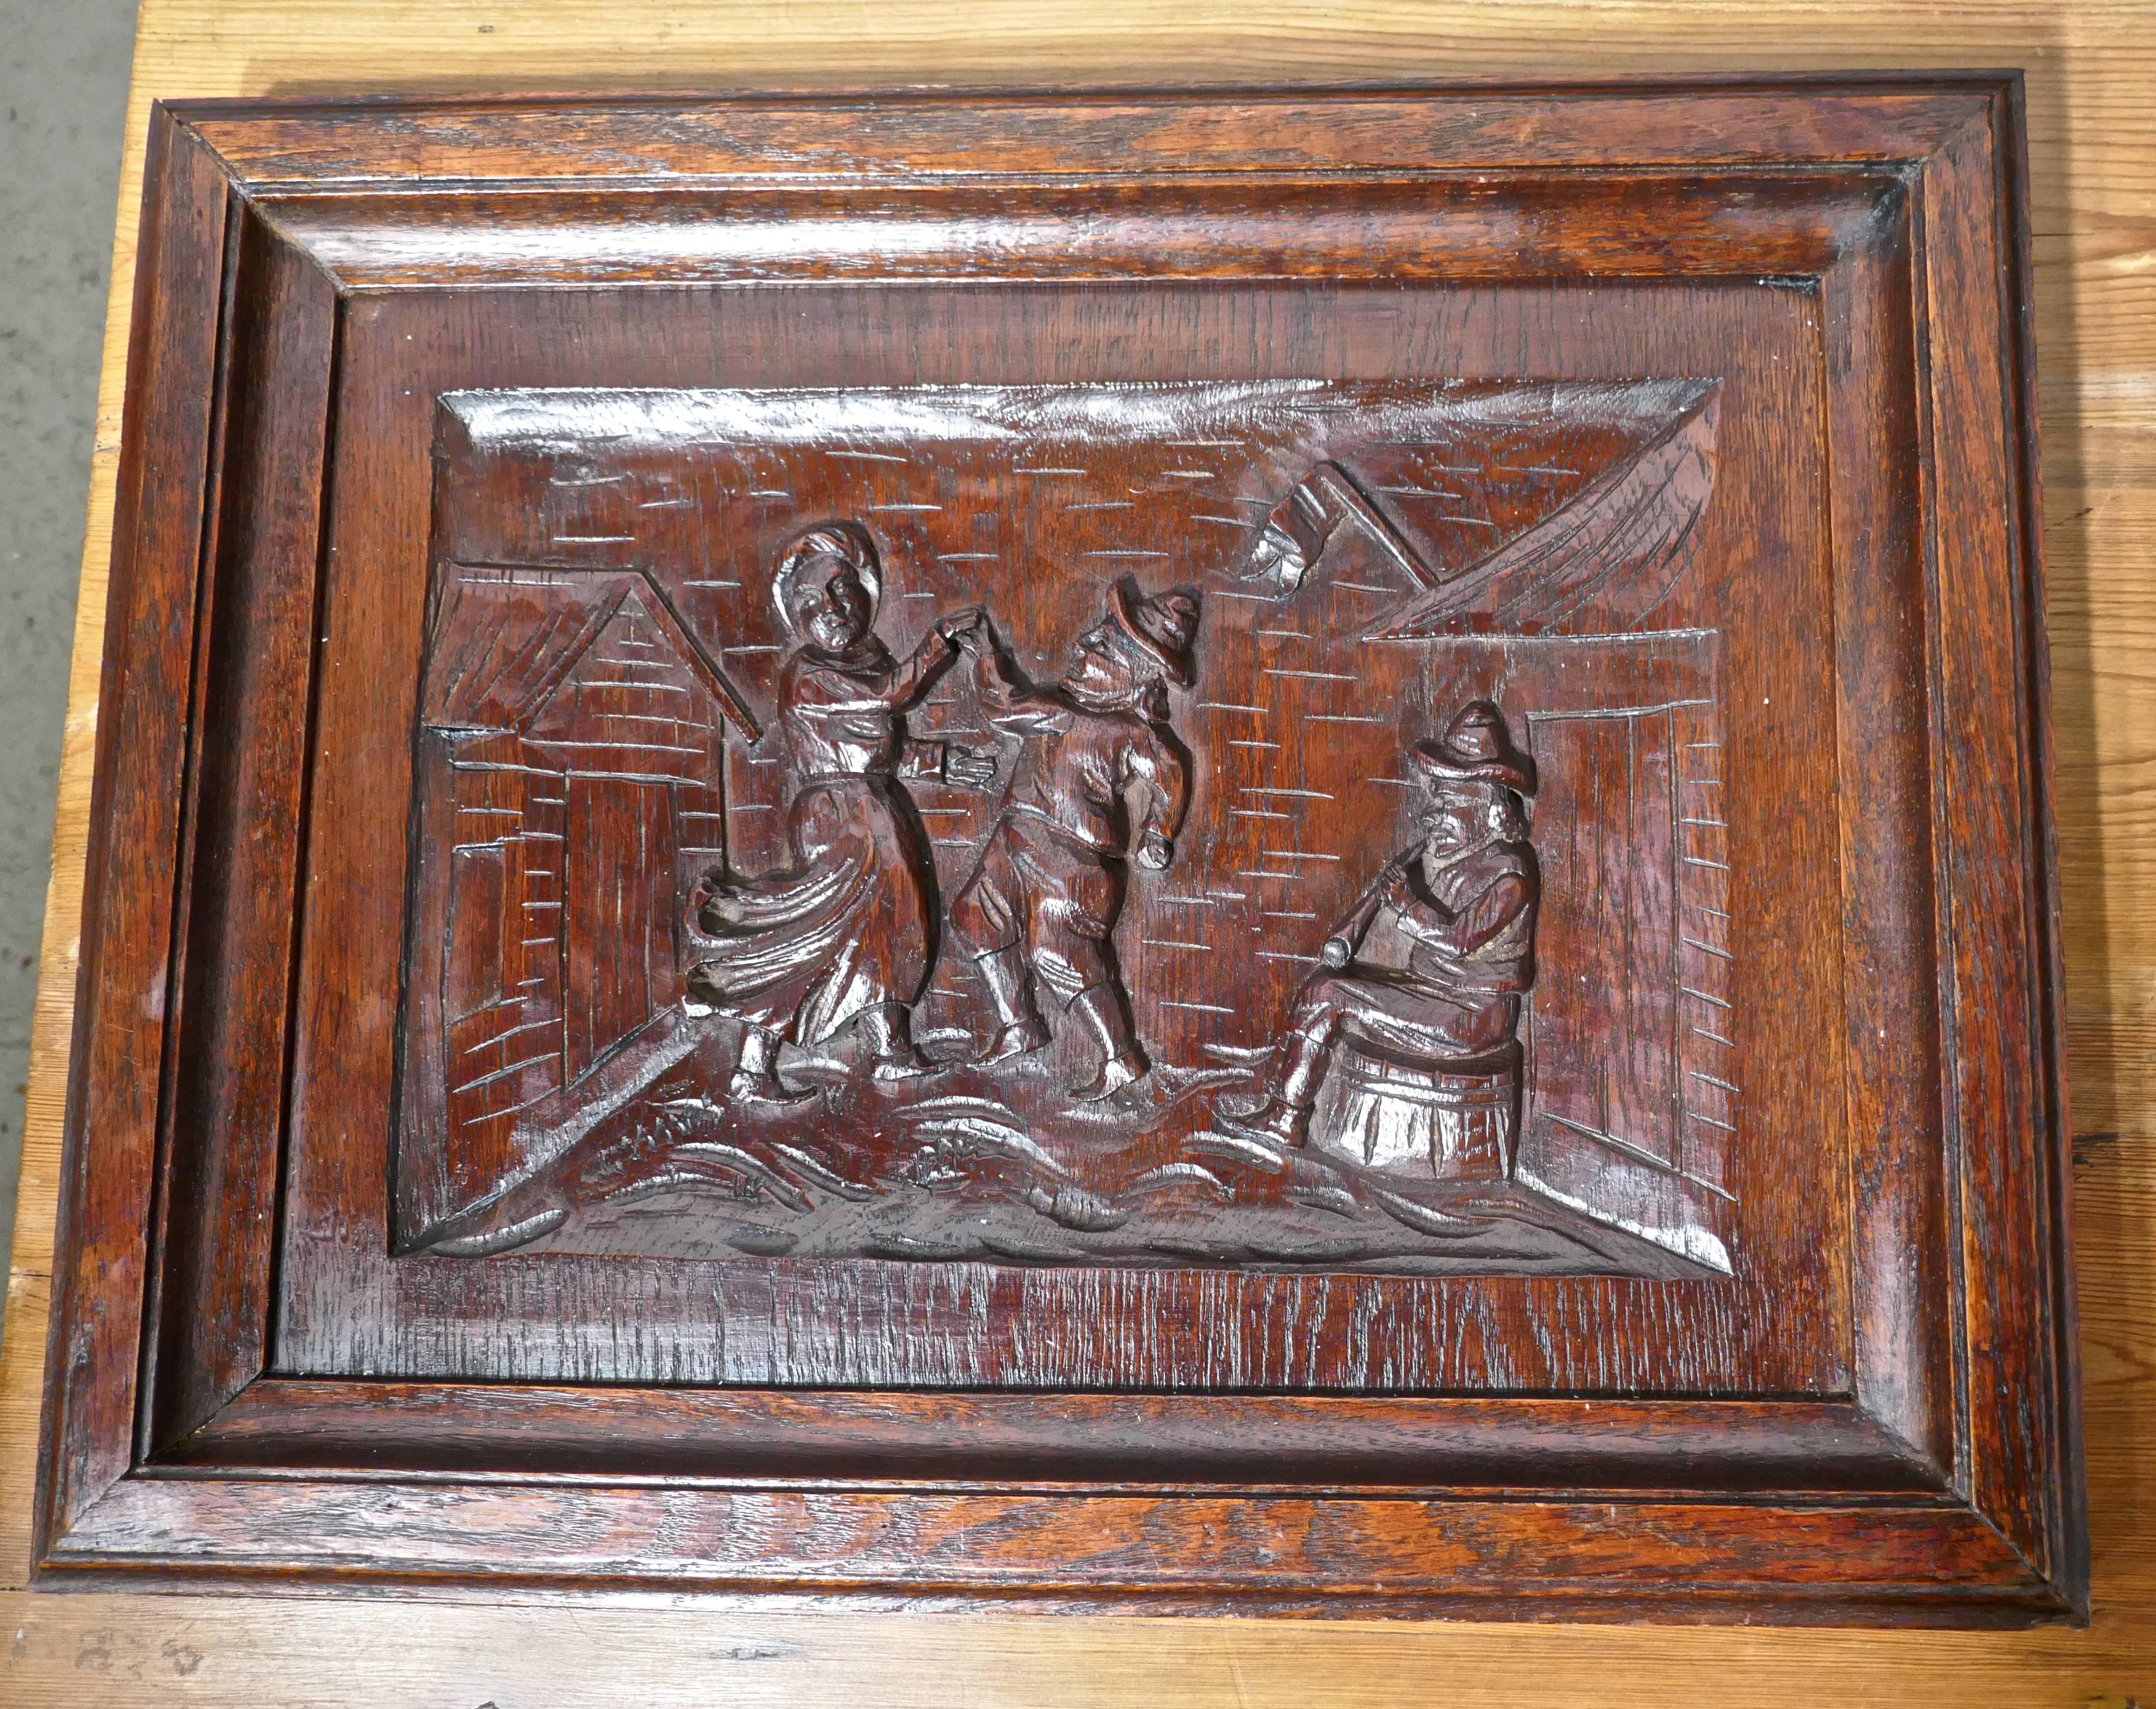 These are a superb decorative set, the carved oak panels are about 1.5 inches thick, each has a tavern scene and the subjects can be seen dancing, drinking, gambling and so on
The carved panels have been carved very skillfully, they have an